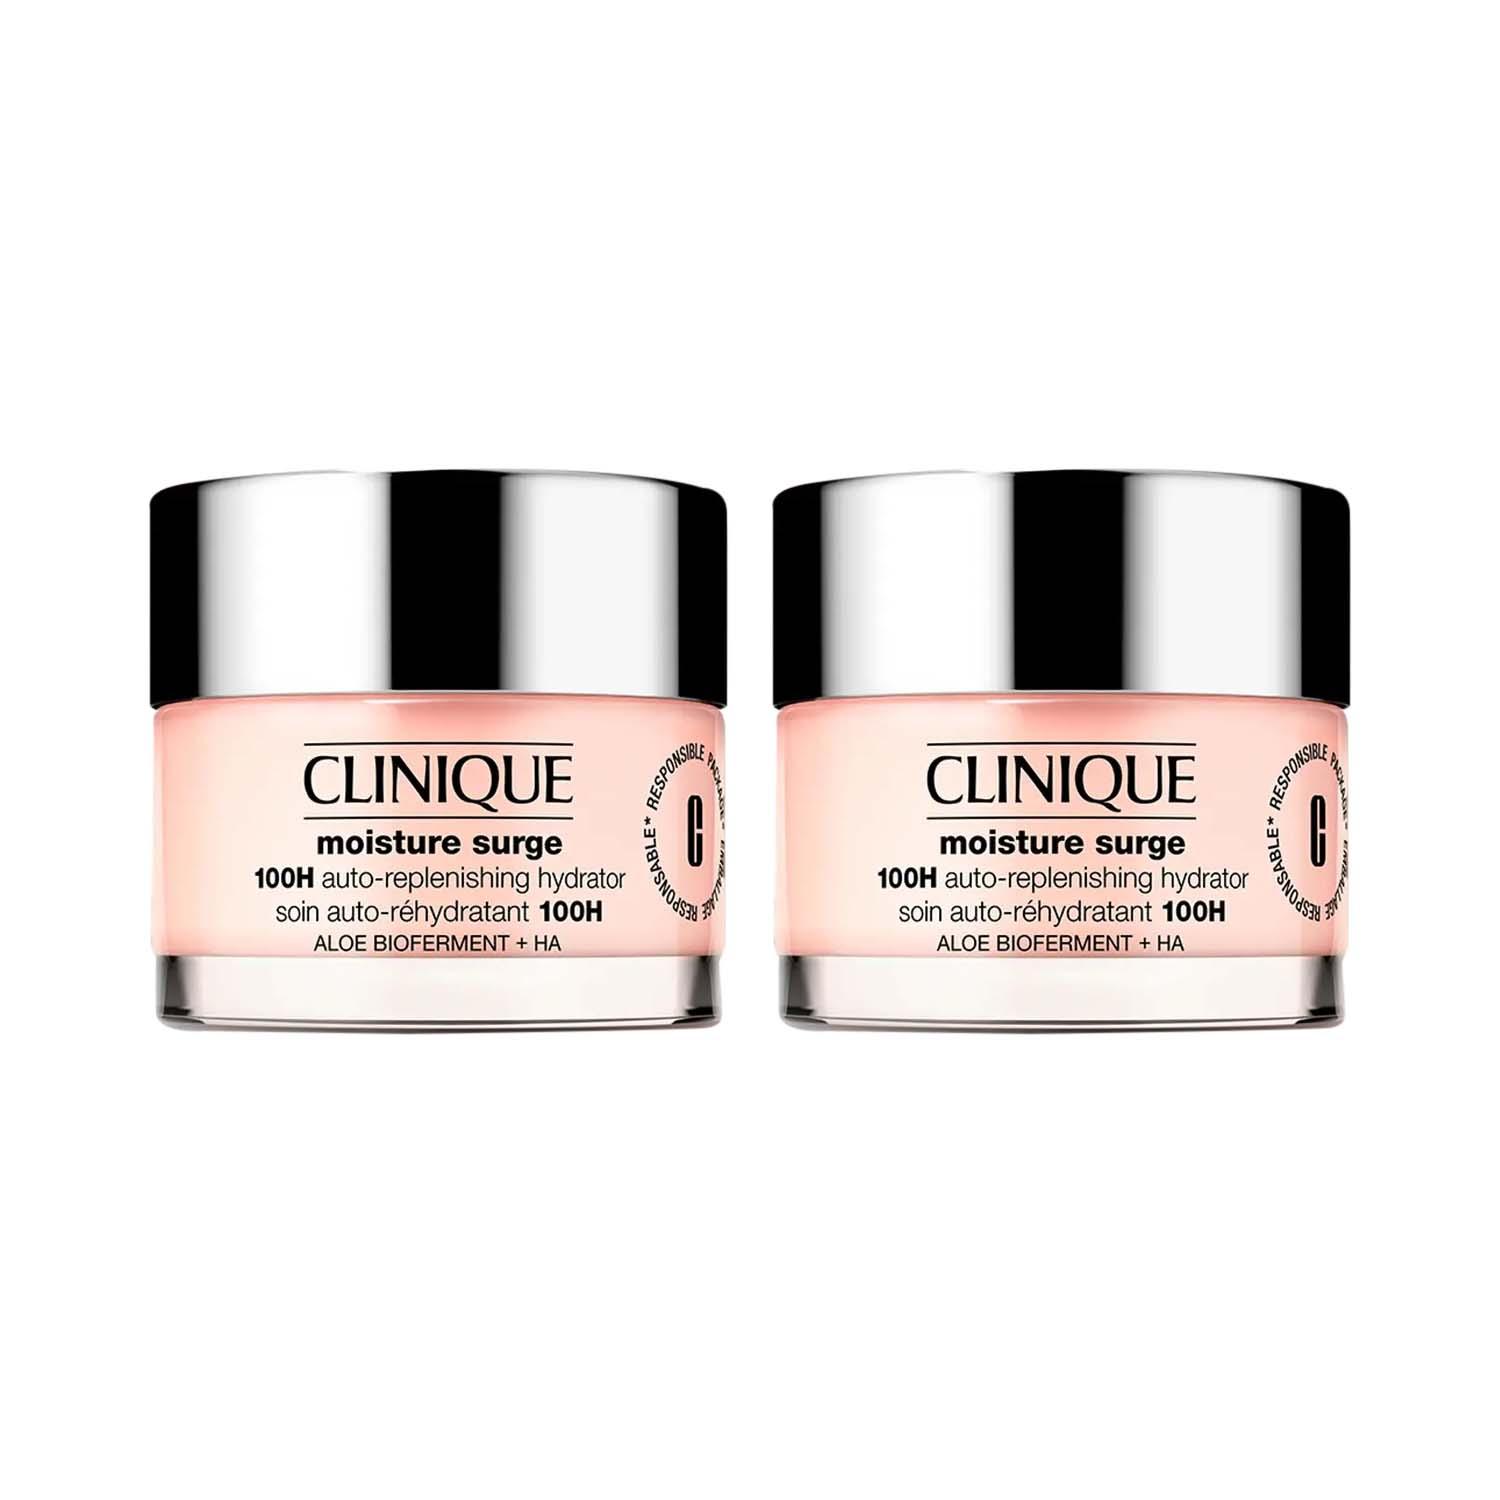 CLINIQUE Mositure surge (50 ml + 50 ml) Duo Combo